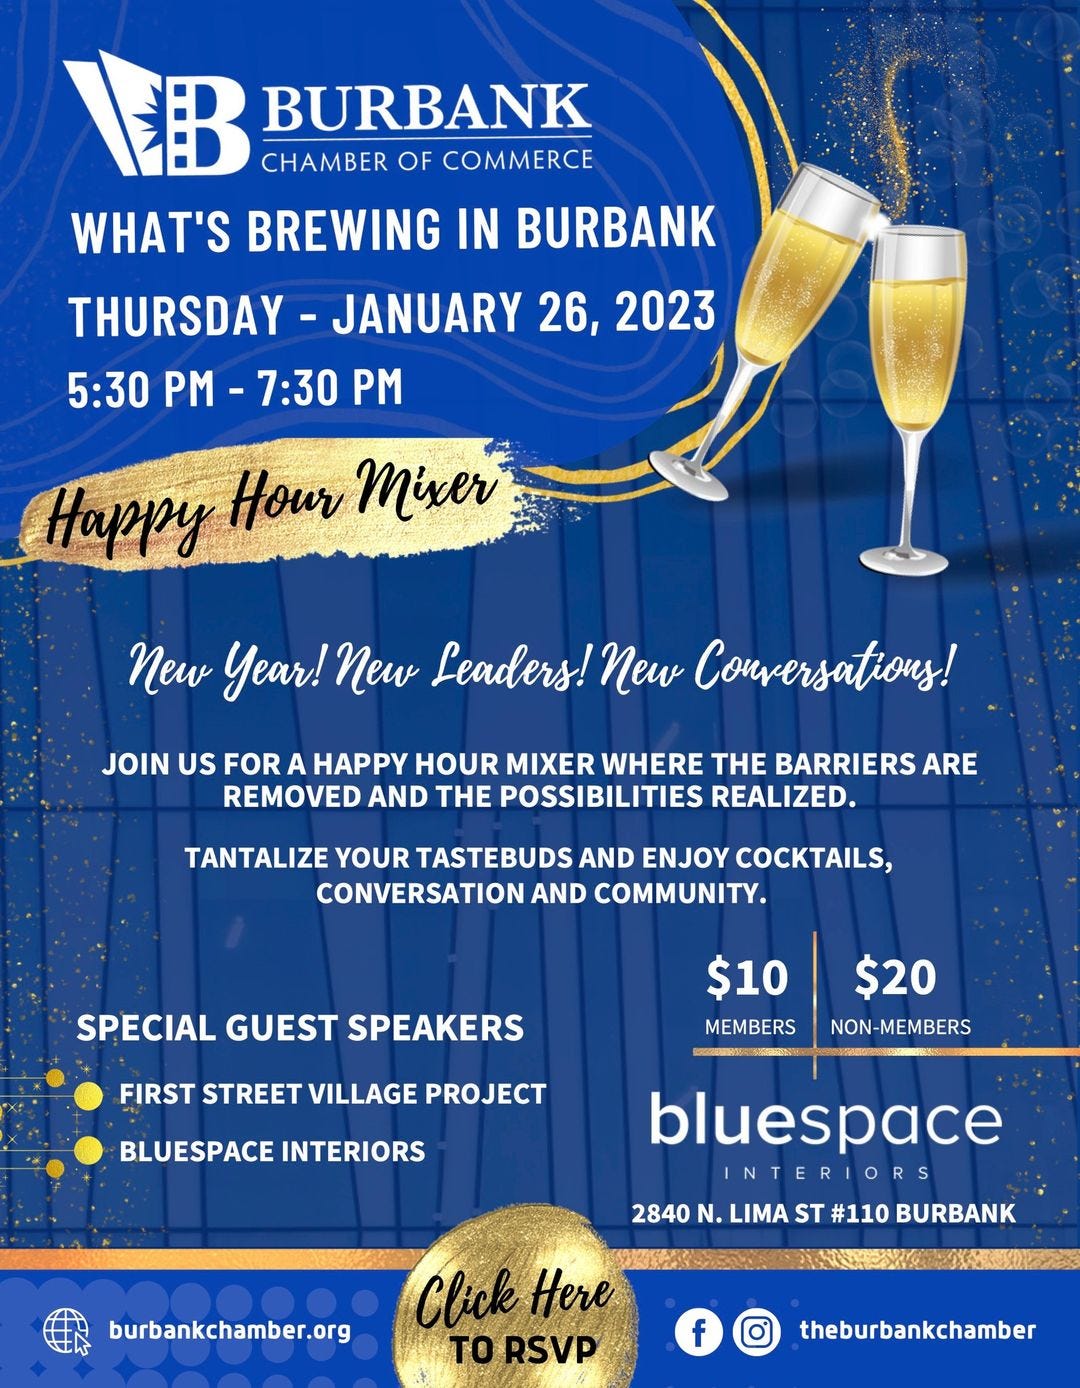 May be an image of text that says 'BURBANK CHAMBER OF COMMERCE WHAT'S BREWING IN BURBANK THURSDAY JANUARY 26, 2023 5:30 PM -7:30 PM Happy Hour Mixer New Year! new Leaders! New Conversations! ations! JOIN US FOR A HAPPY HOUR MIXER WHERE THE BARRIERS ARE REMOVED AND THE POSSIBILITIES REALIZED. TANTALIZE YOUR TASTEBUDS AND ENJOY COCKTAILS, CONVERSATION AND COMMUNITY. SPECIAL GUEST SPEAKERS FIRST STREET VILLAGE PROJECT $10 MEMBERS $20 NON-MEMBERS BLUESPACE INTERIORS bluespace INTERIORS 2840 N. LIMA ST #110 BURBANK burbankchamber.org Click TORSVP f theburbankchamber'